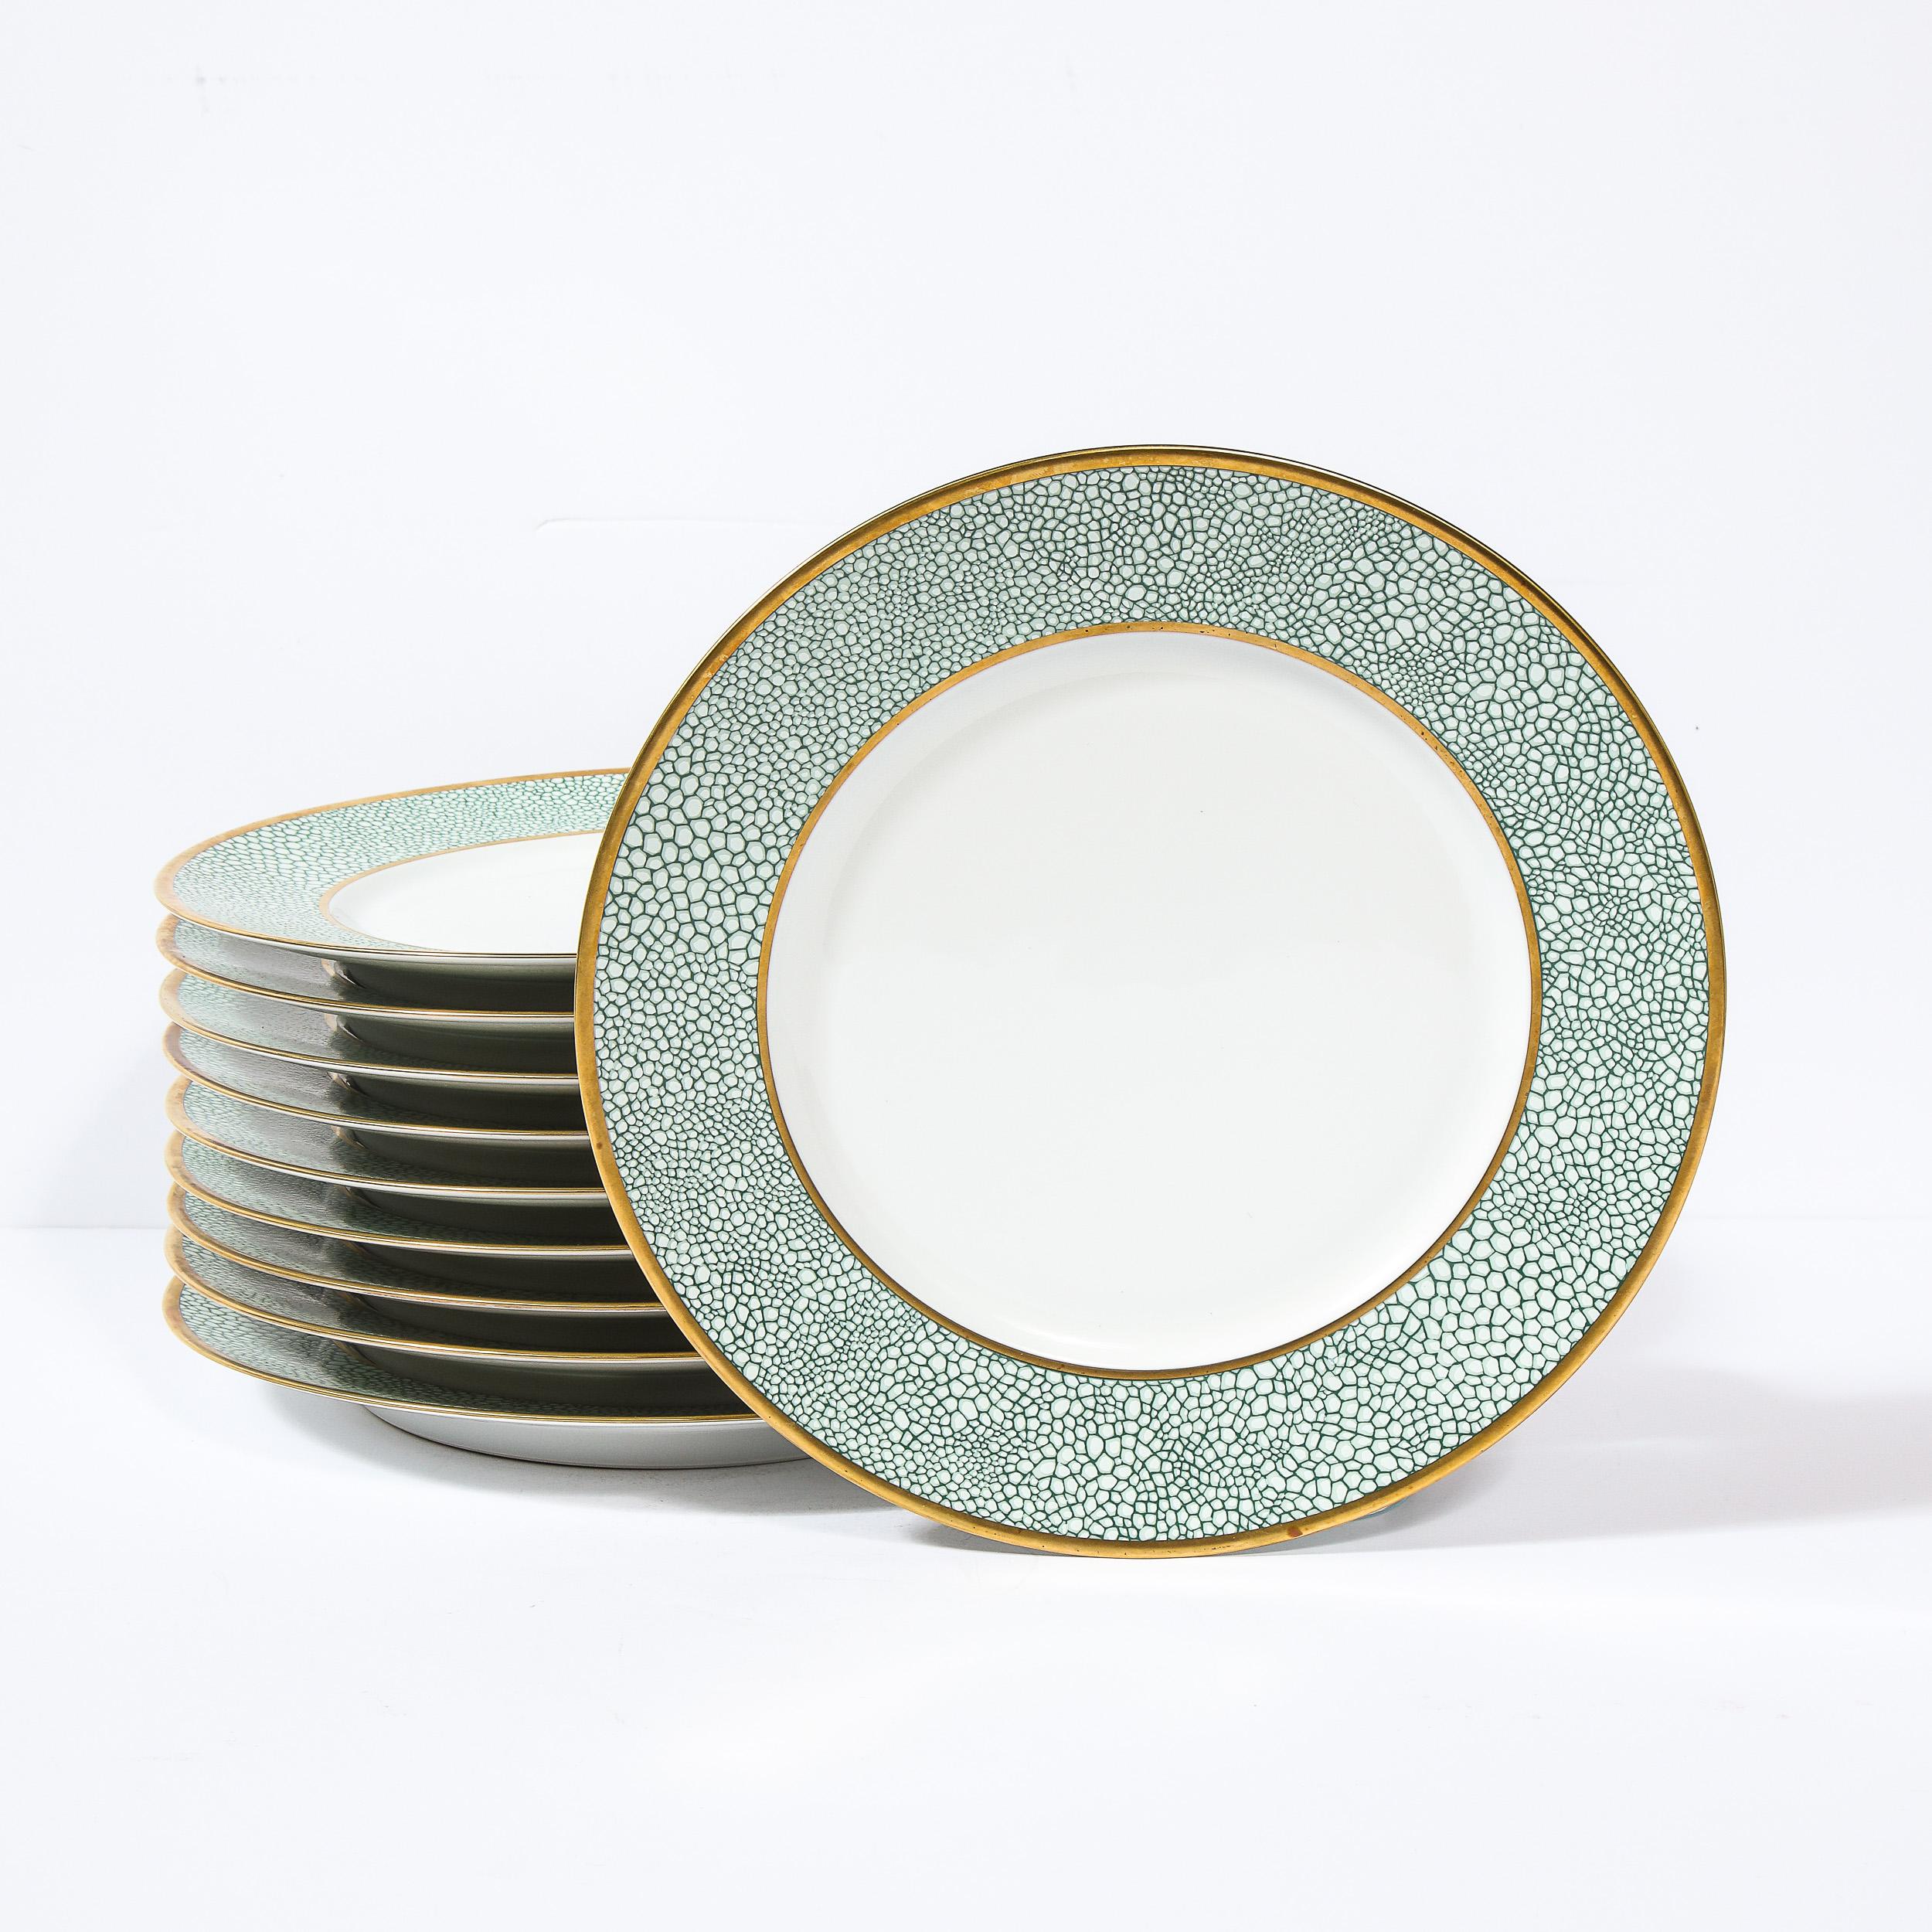 This stunning set of eight Galuchat pattern limoges porcelain dinner plates were realized by Manuel Canovas for the legendary French maker Puiforcat in France. They feature white centers circumscribed in 24kt gold with a stylized turquoise shagreen